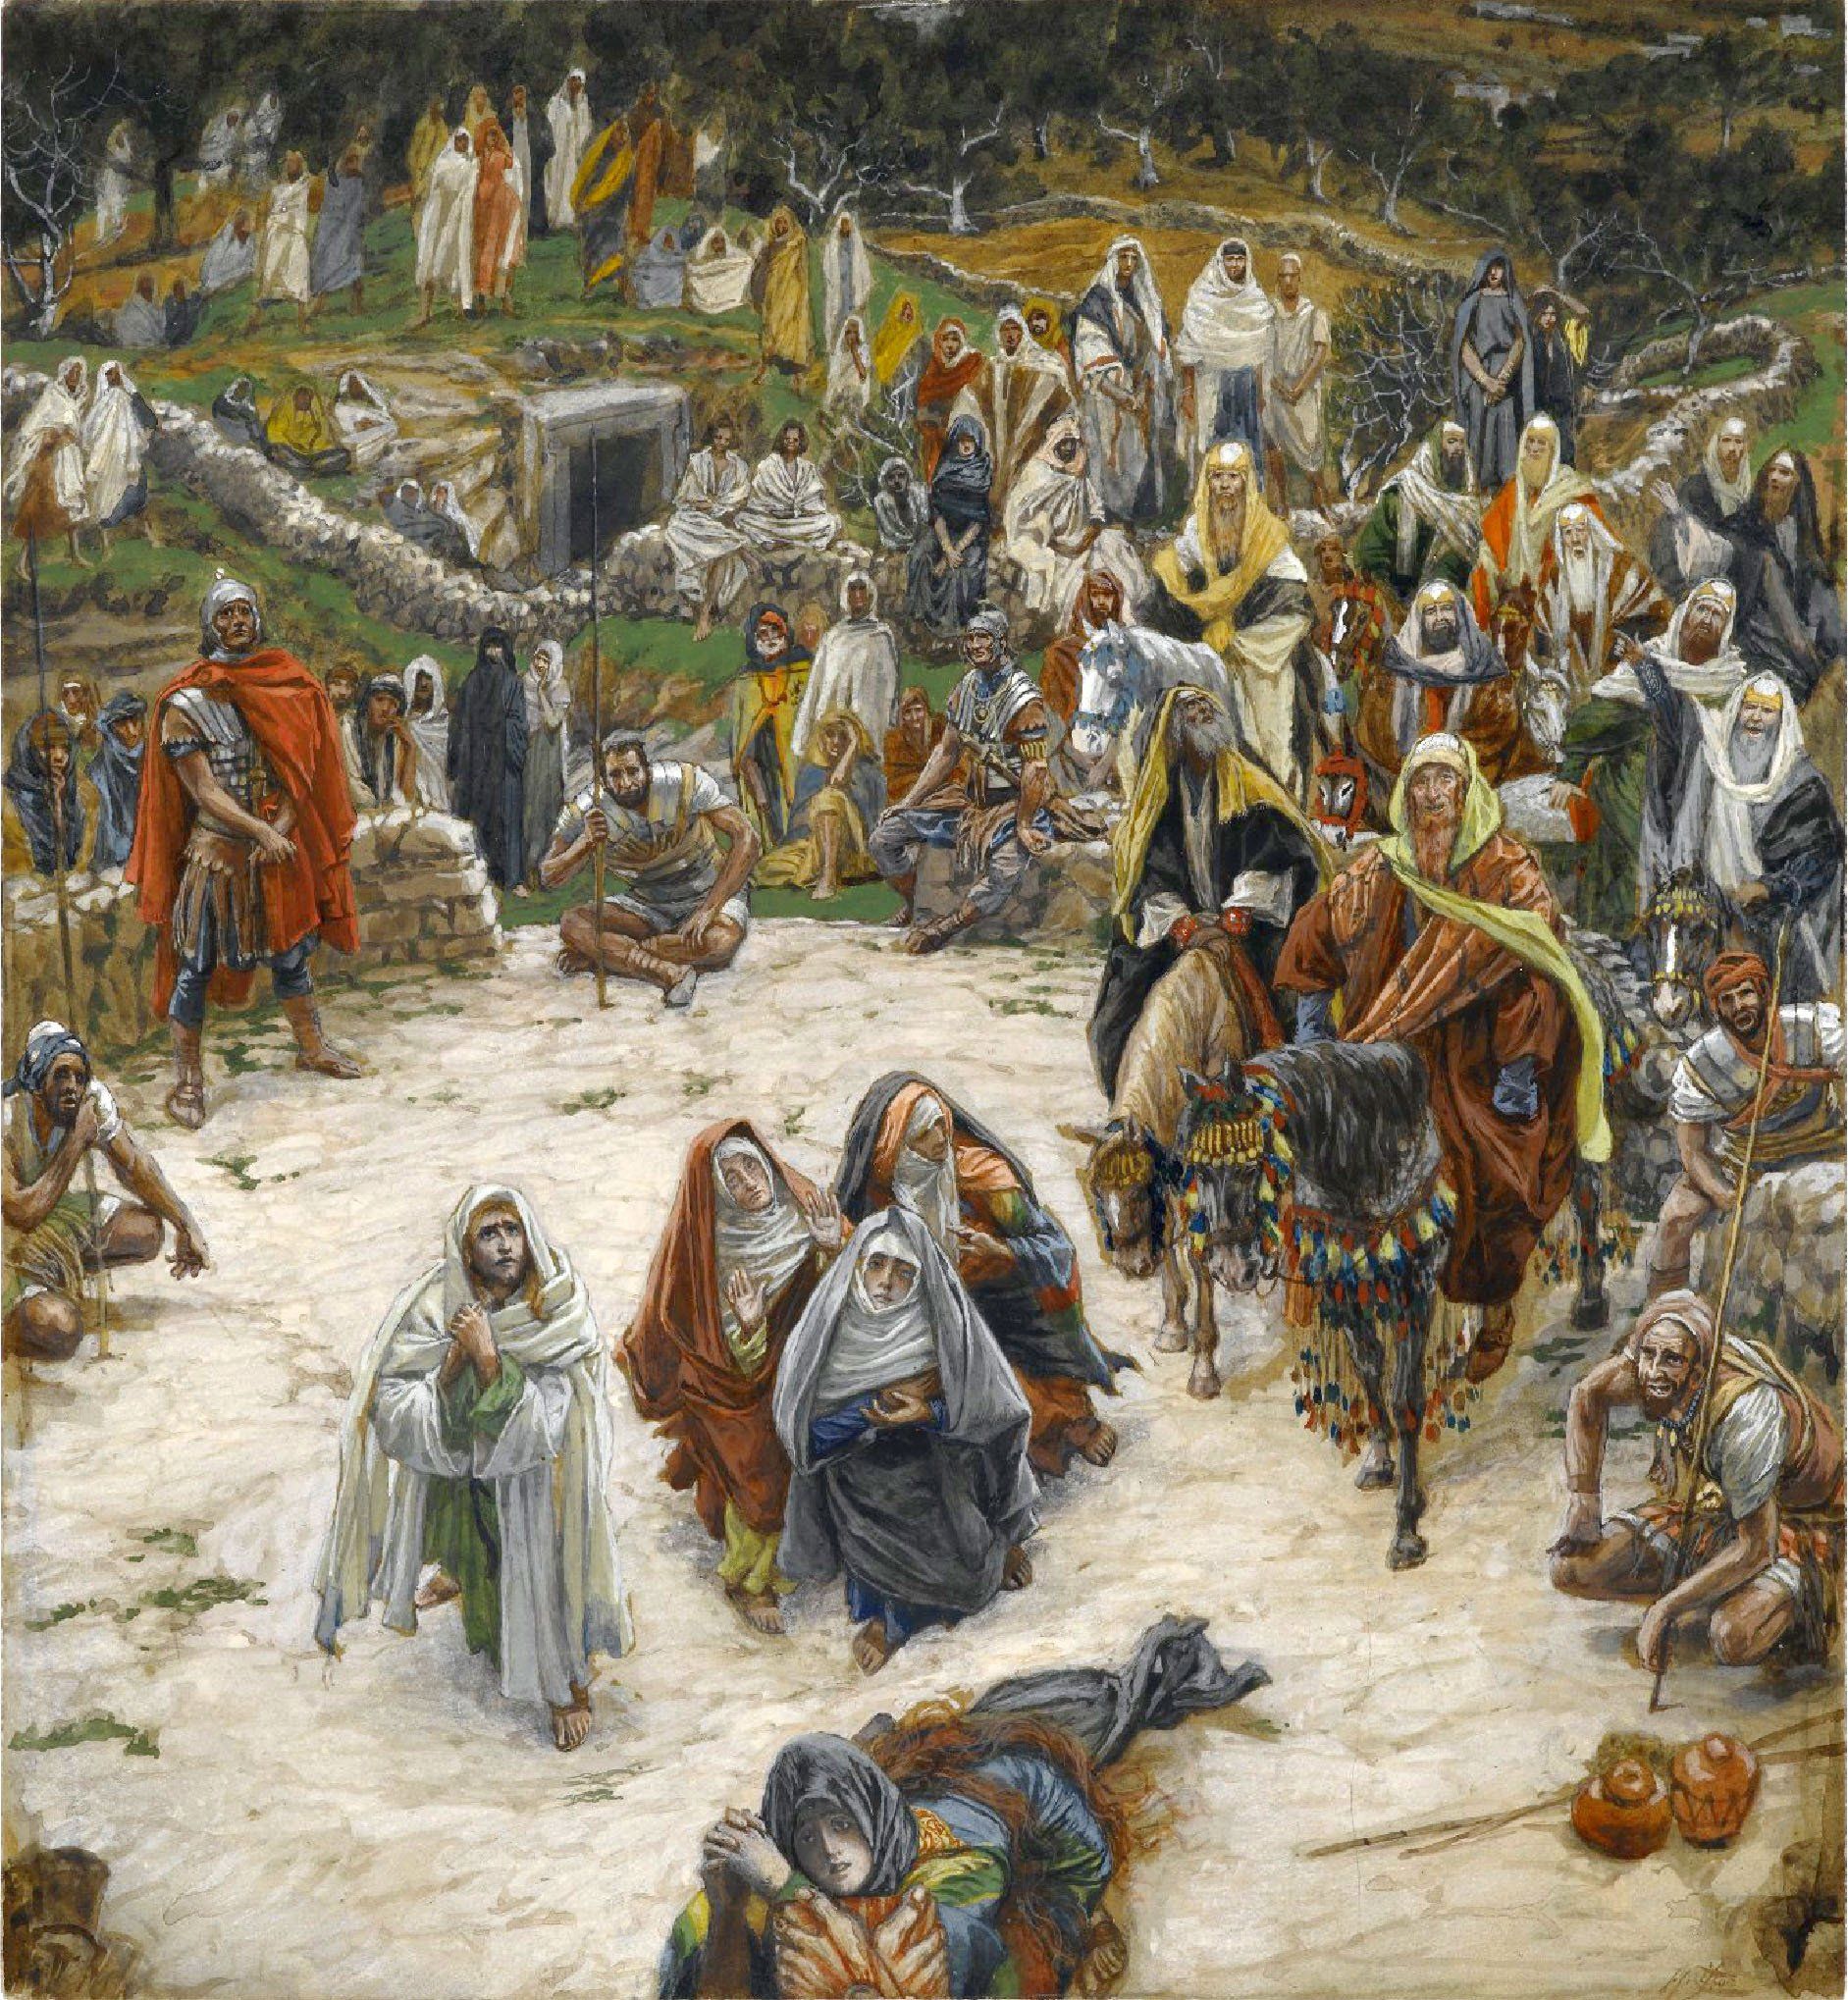 What our Lord saw from the cross by Tissot